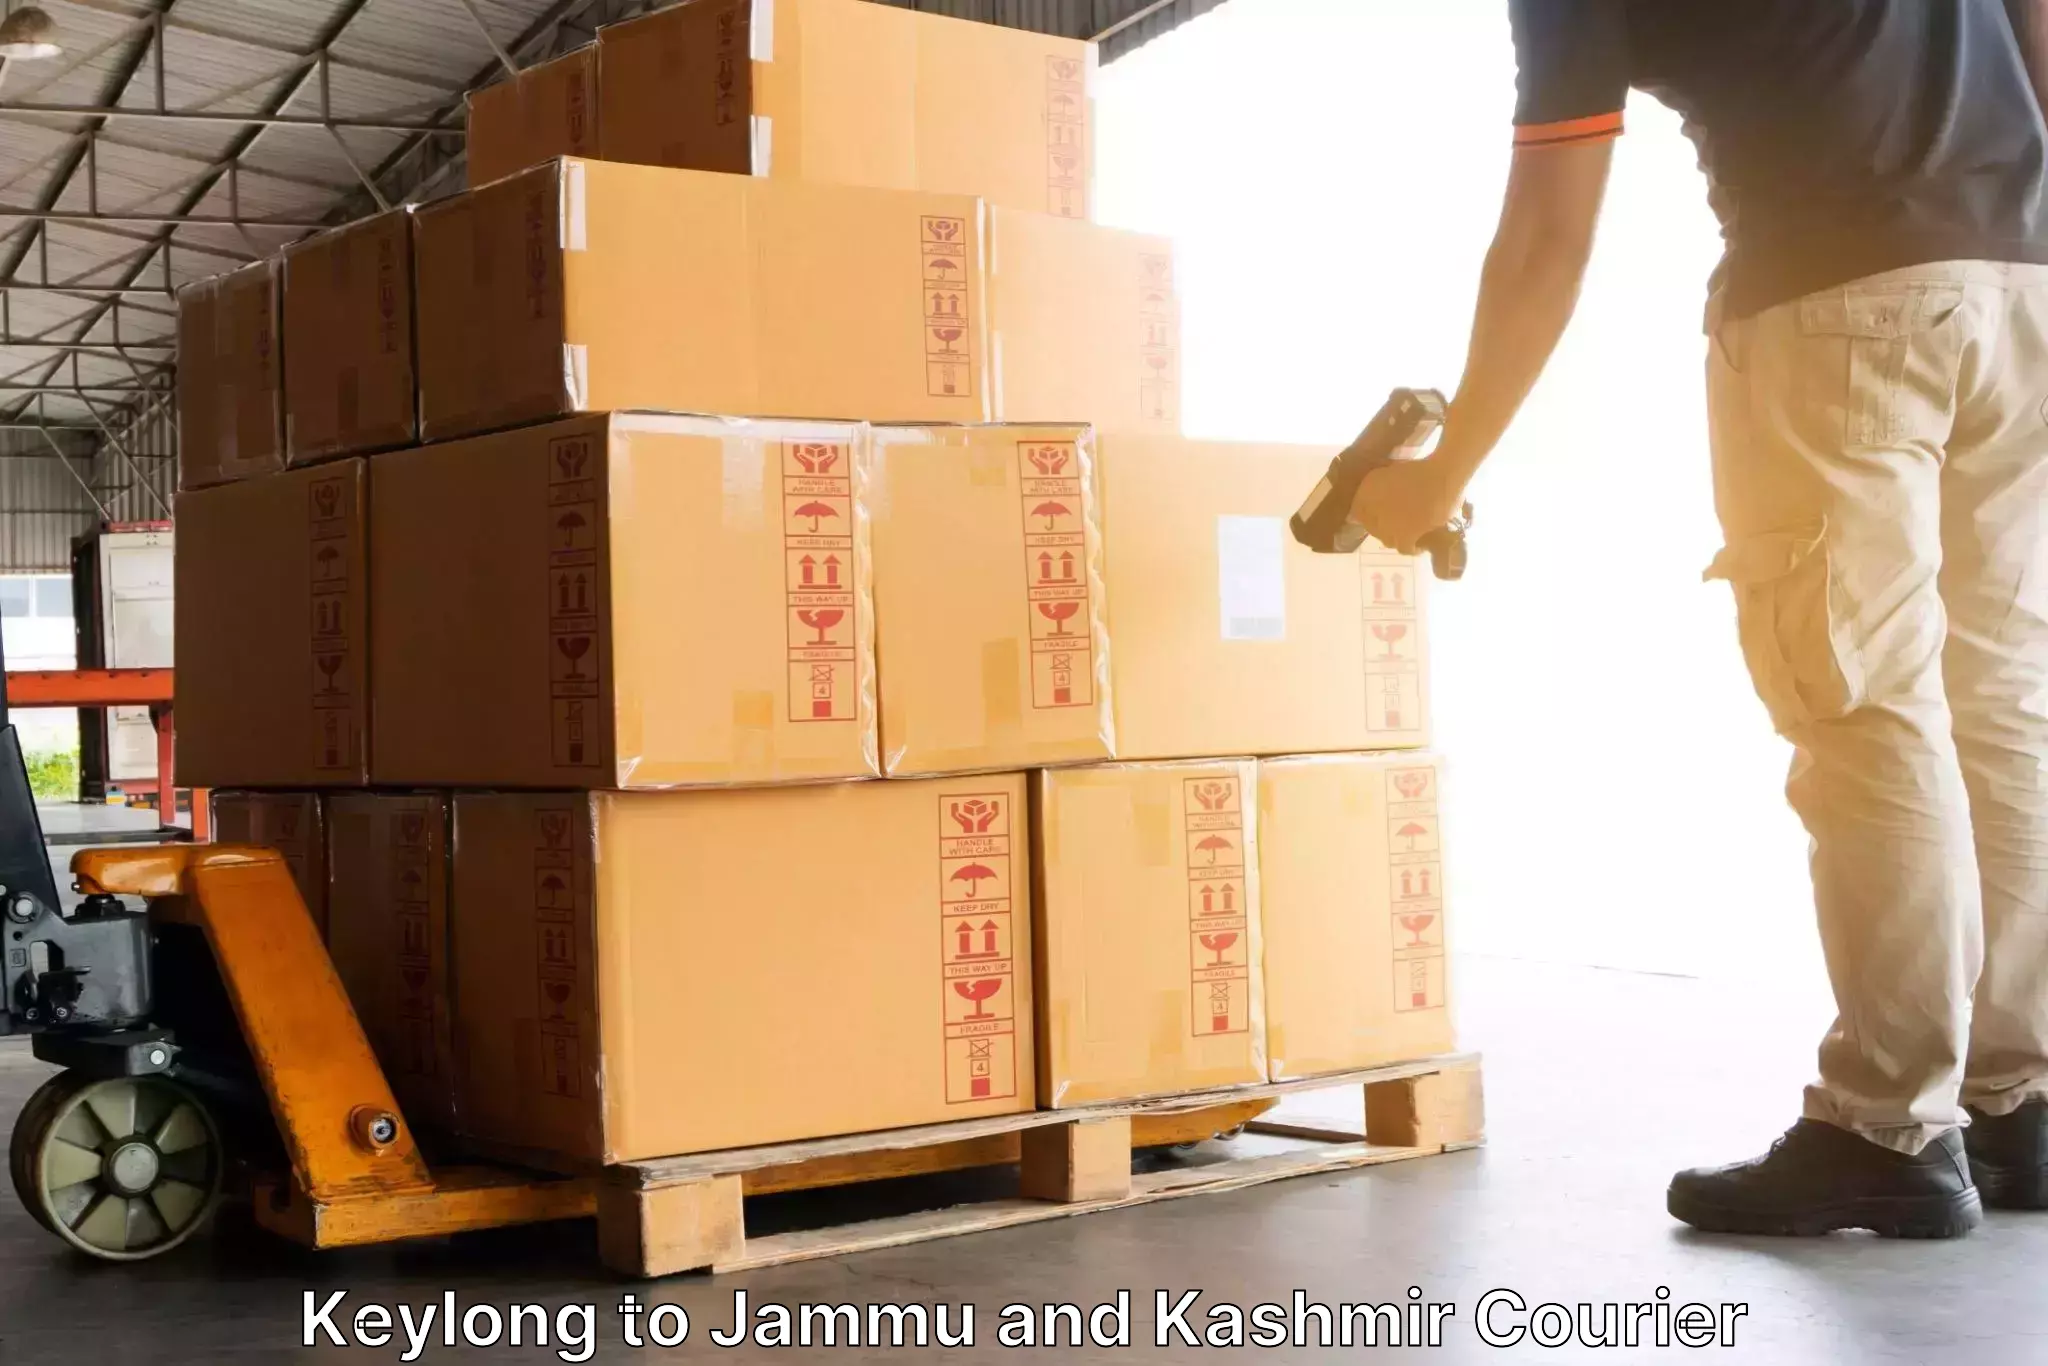 Courier tracking online Keylong to Jammu